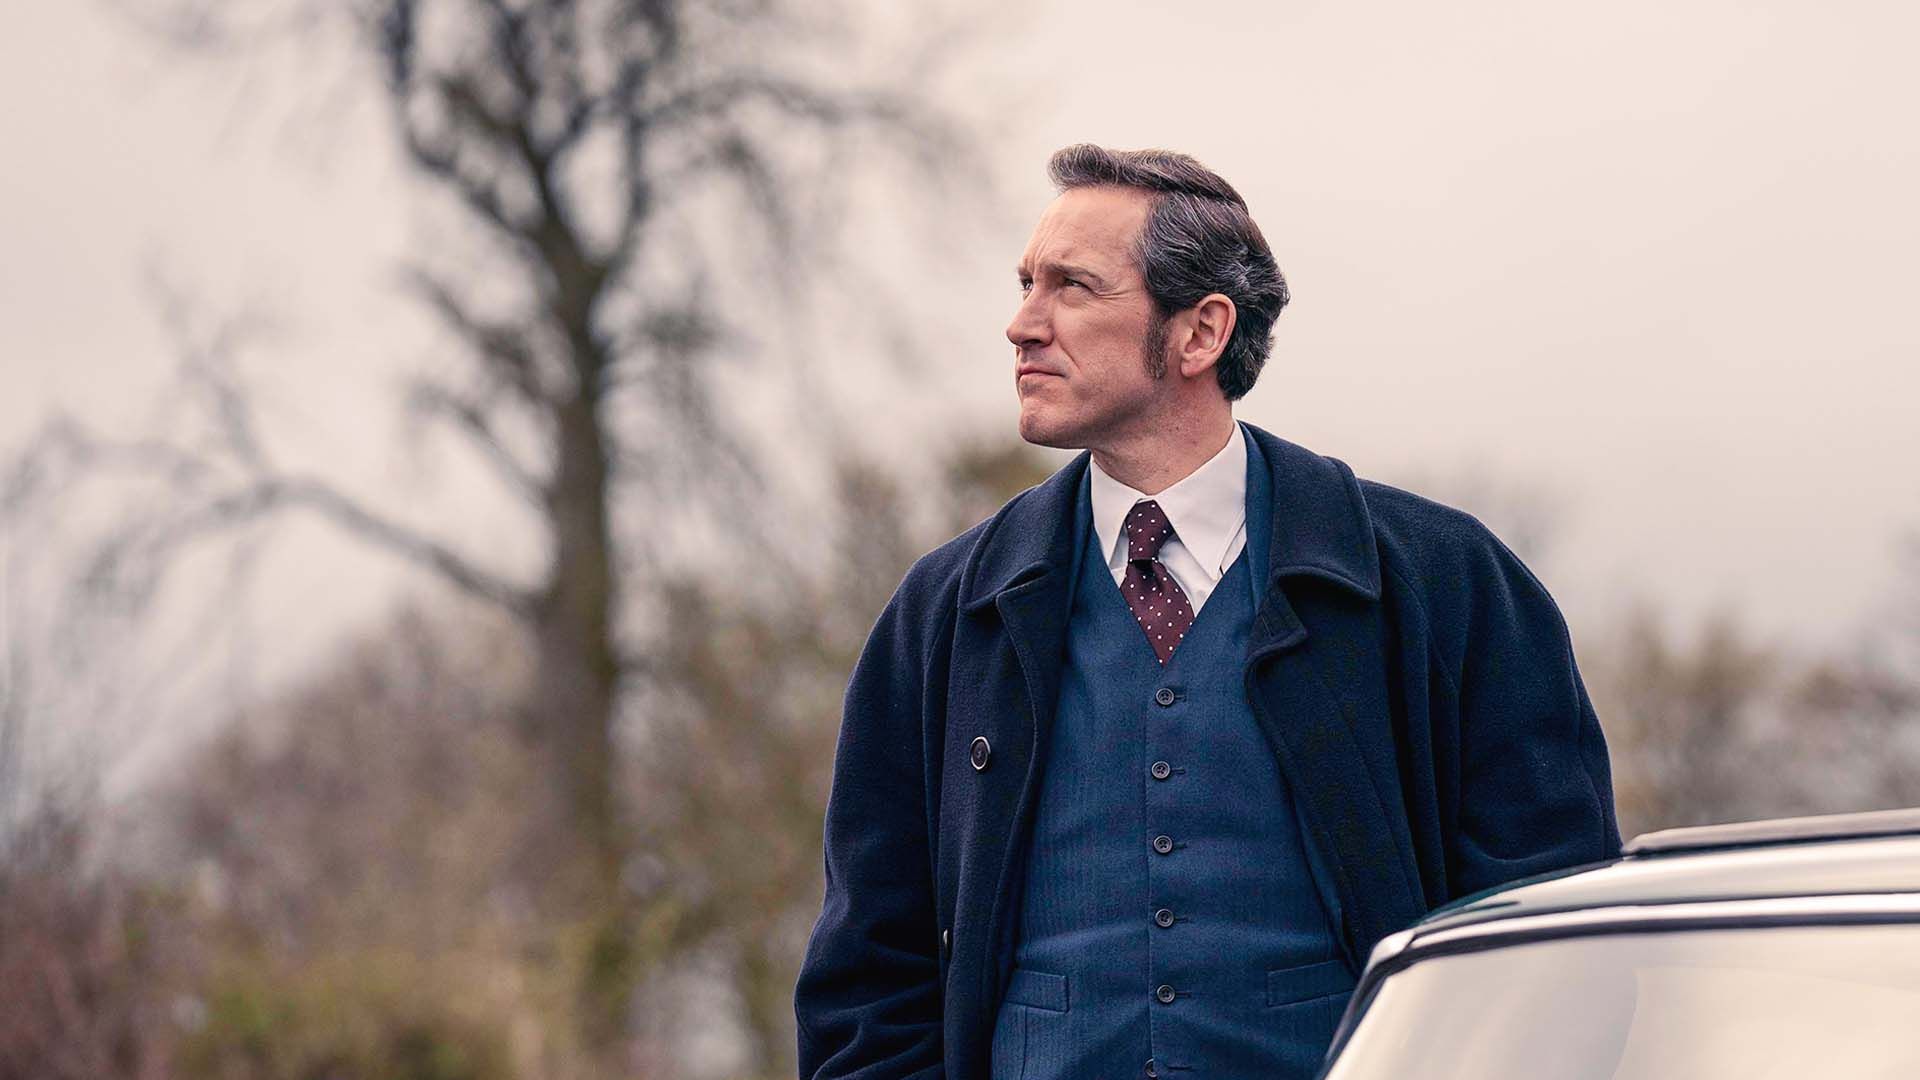 Dalgliesh series 2 to air on Channel 5 in 2023 with Bertie Carvel ...